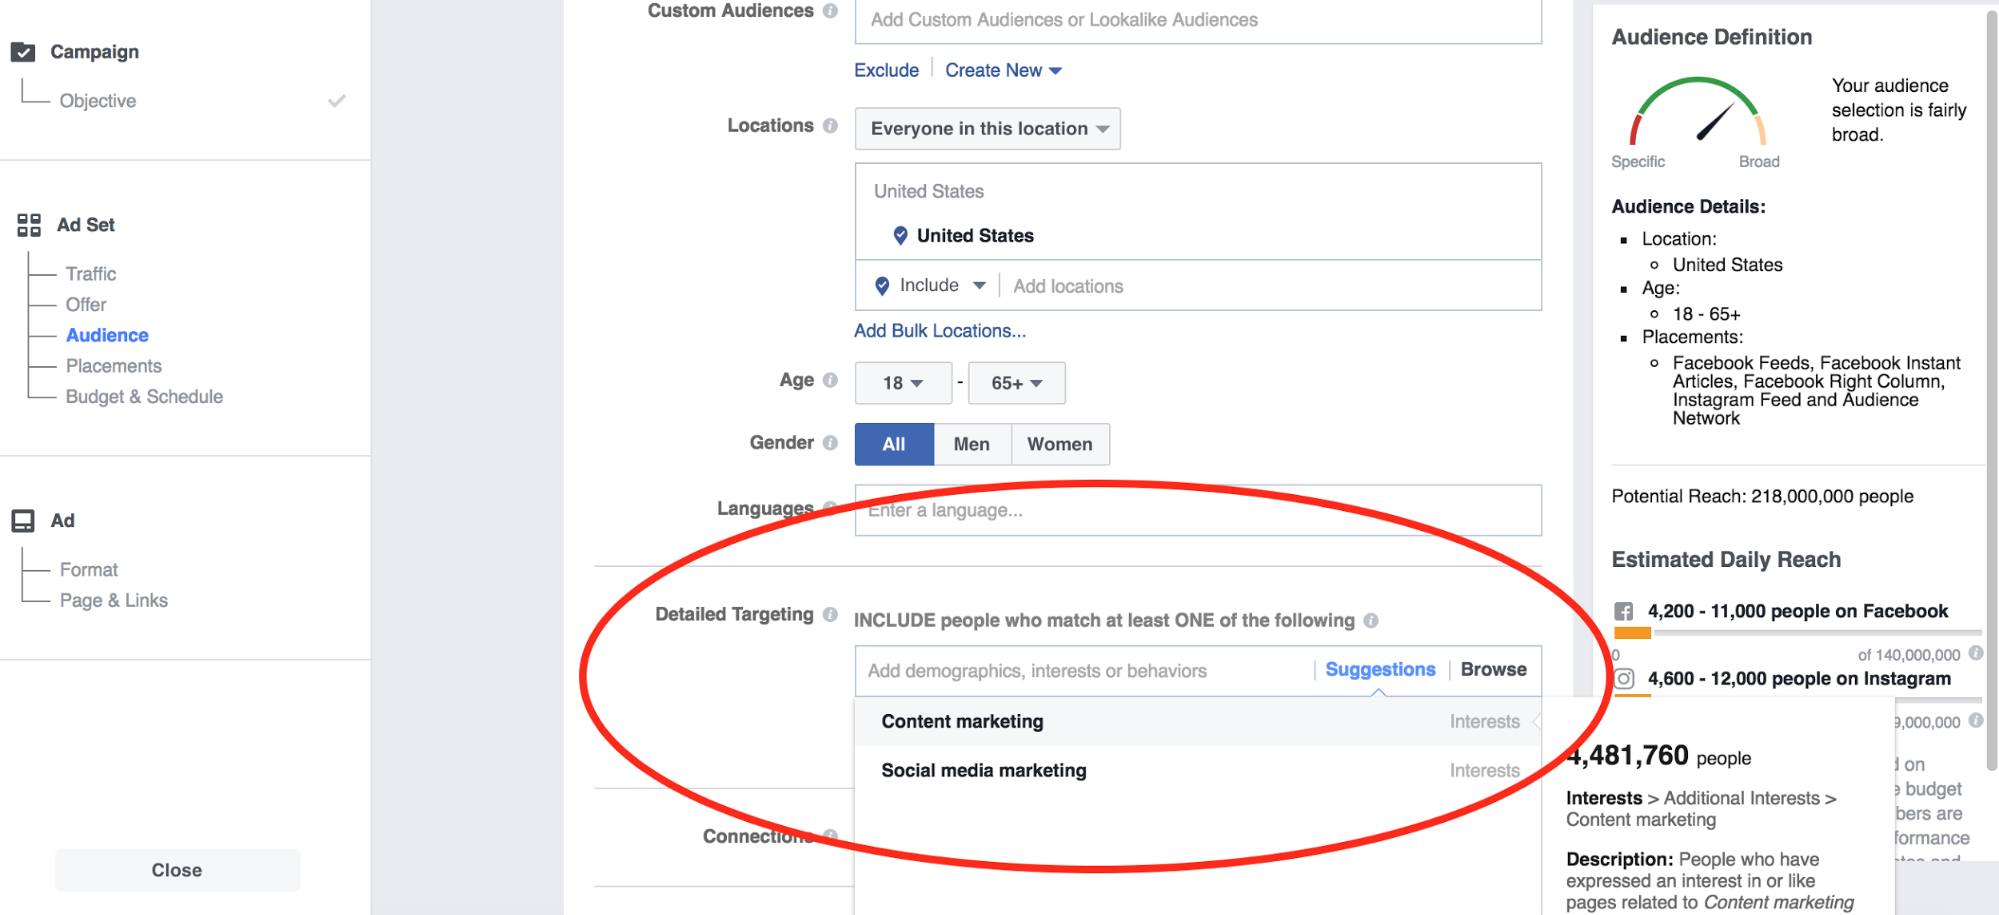 Facebook insights example